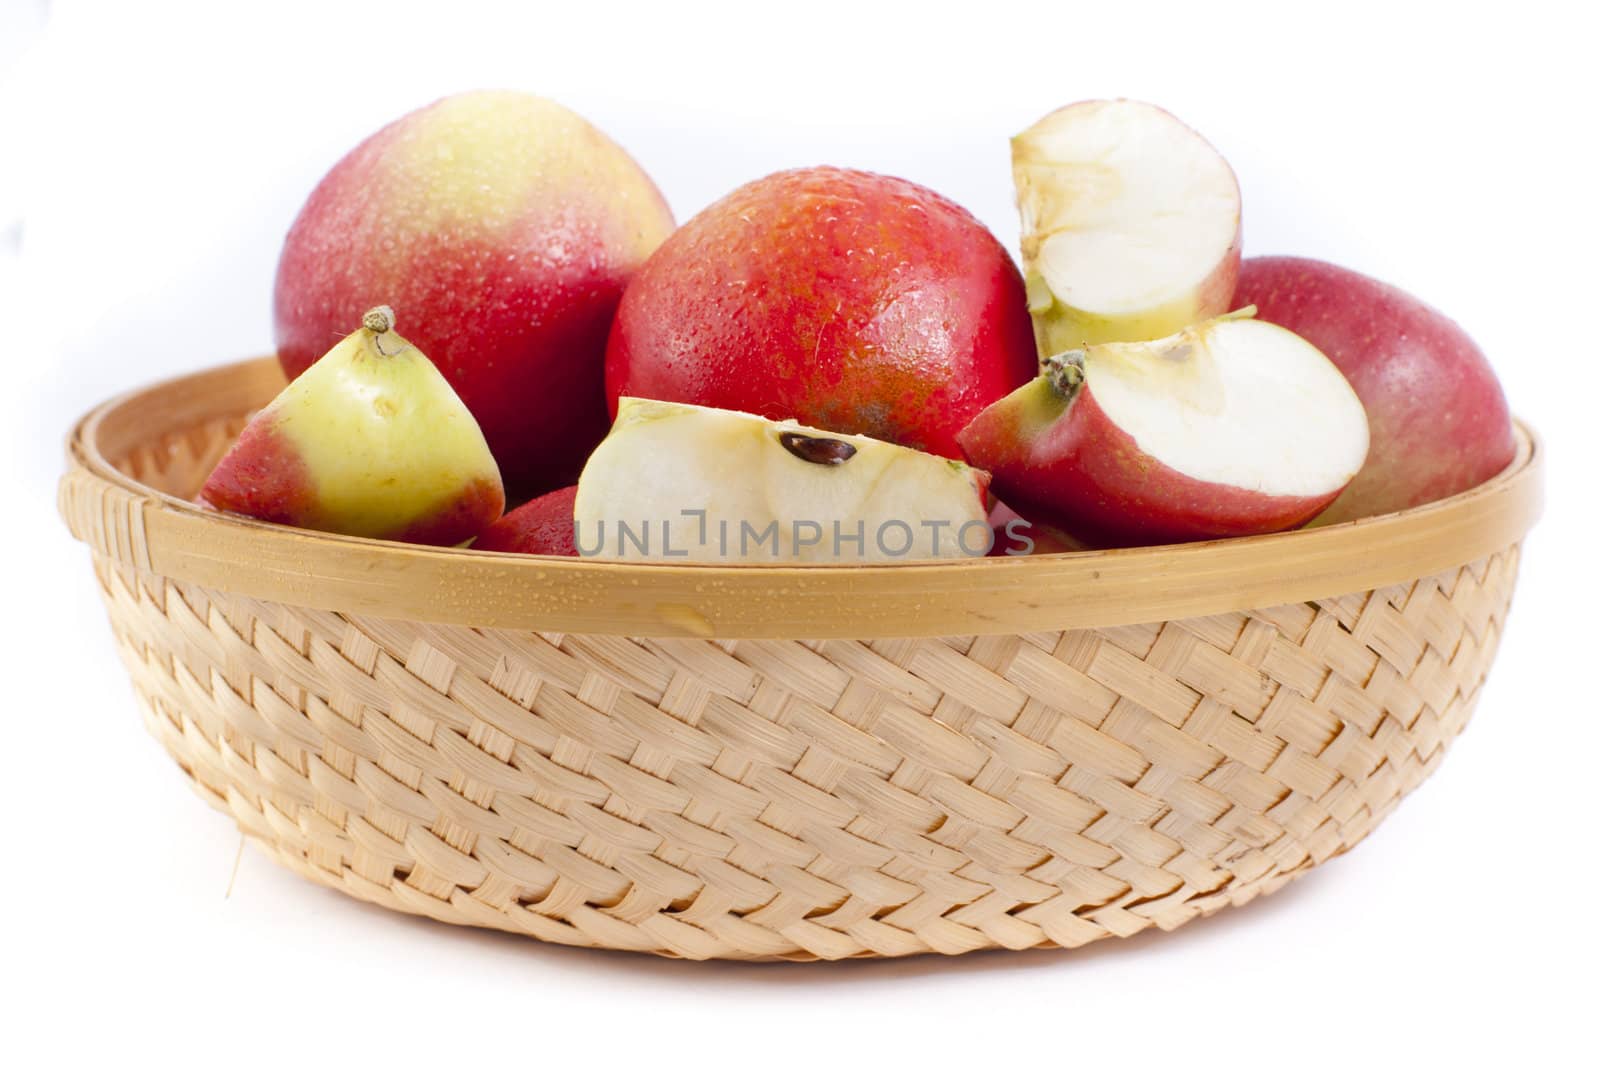 apples are in a basket